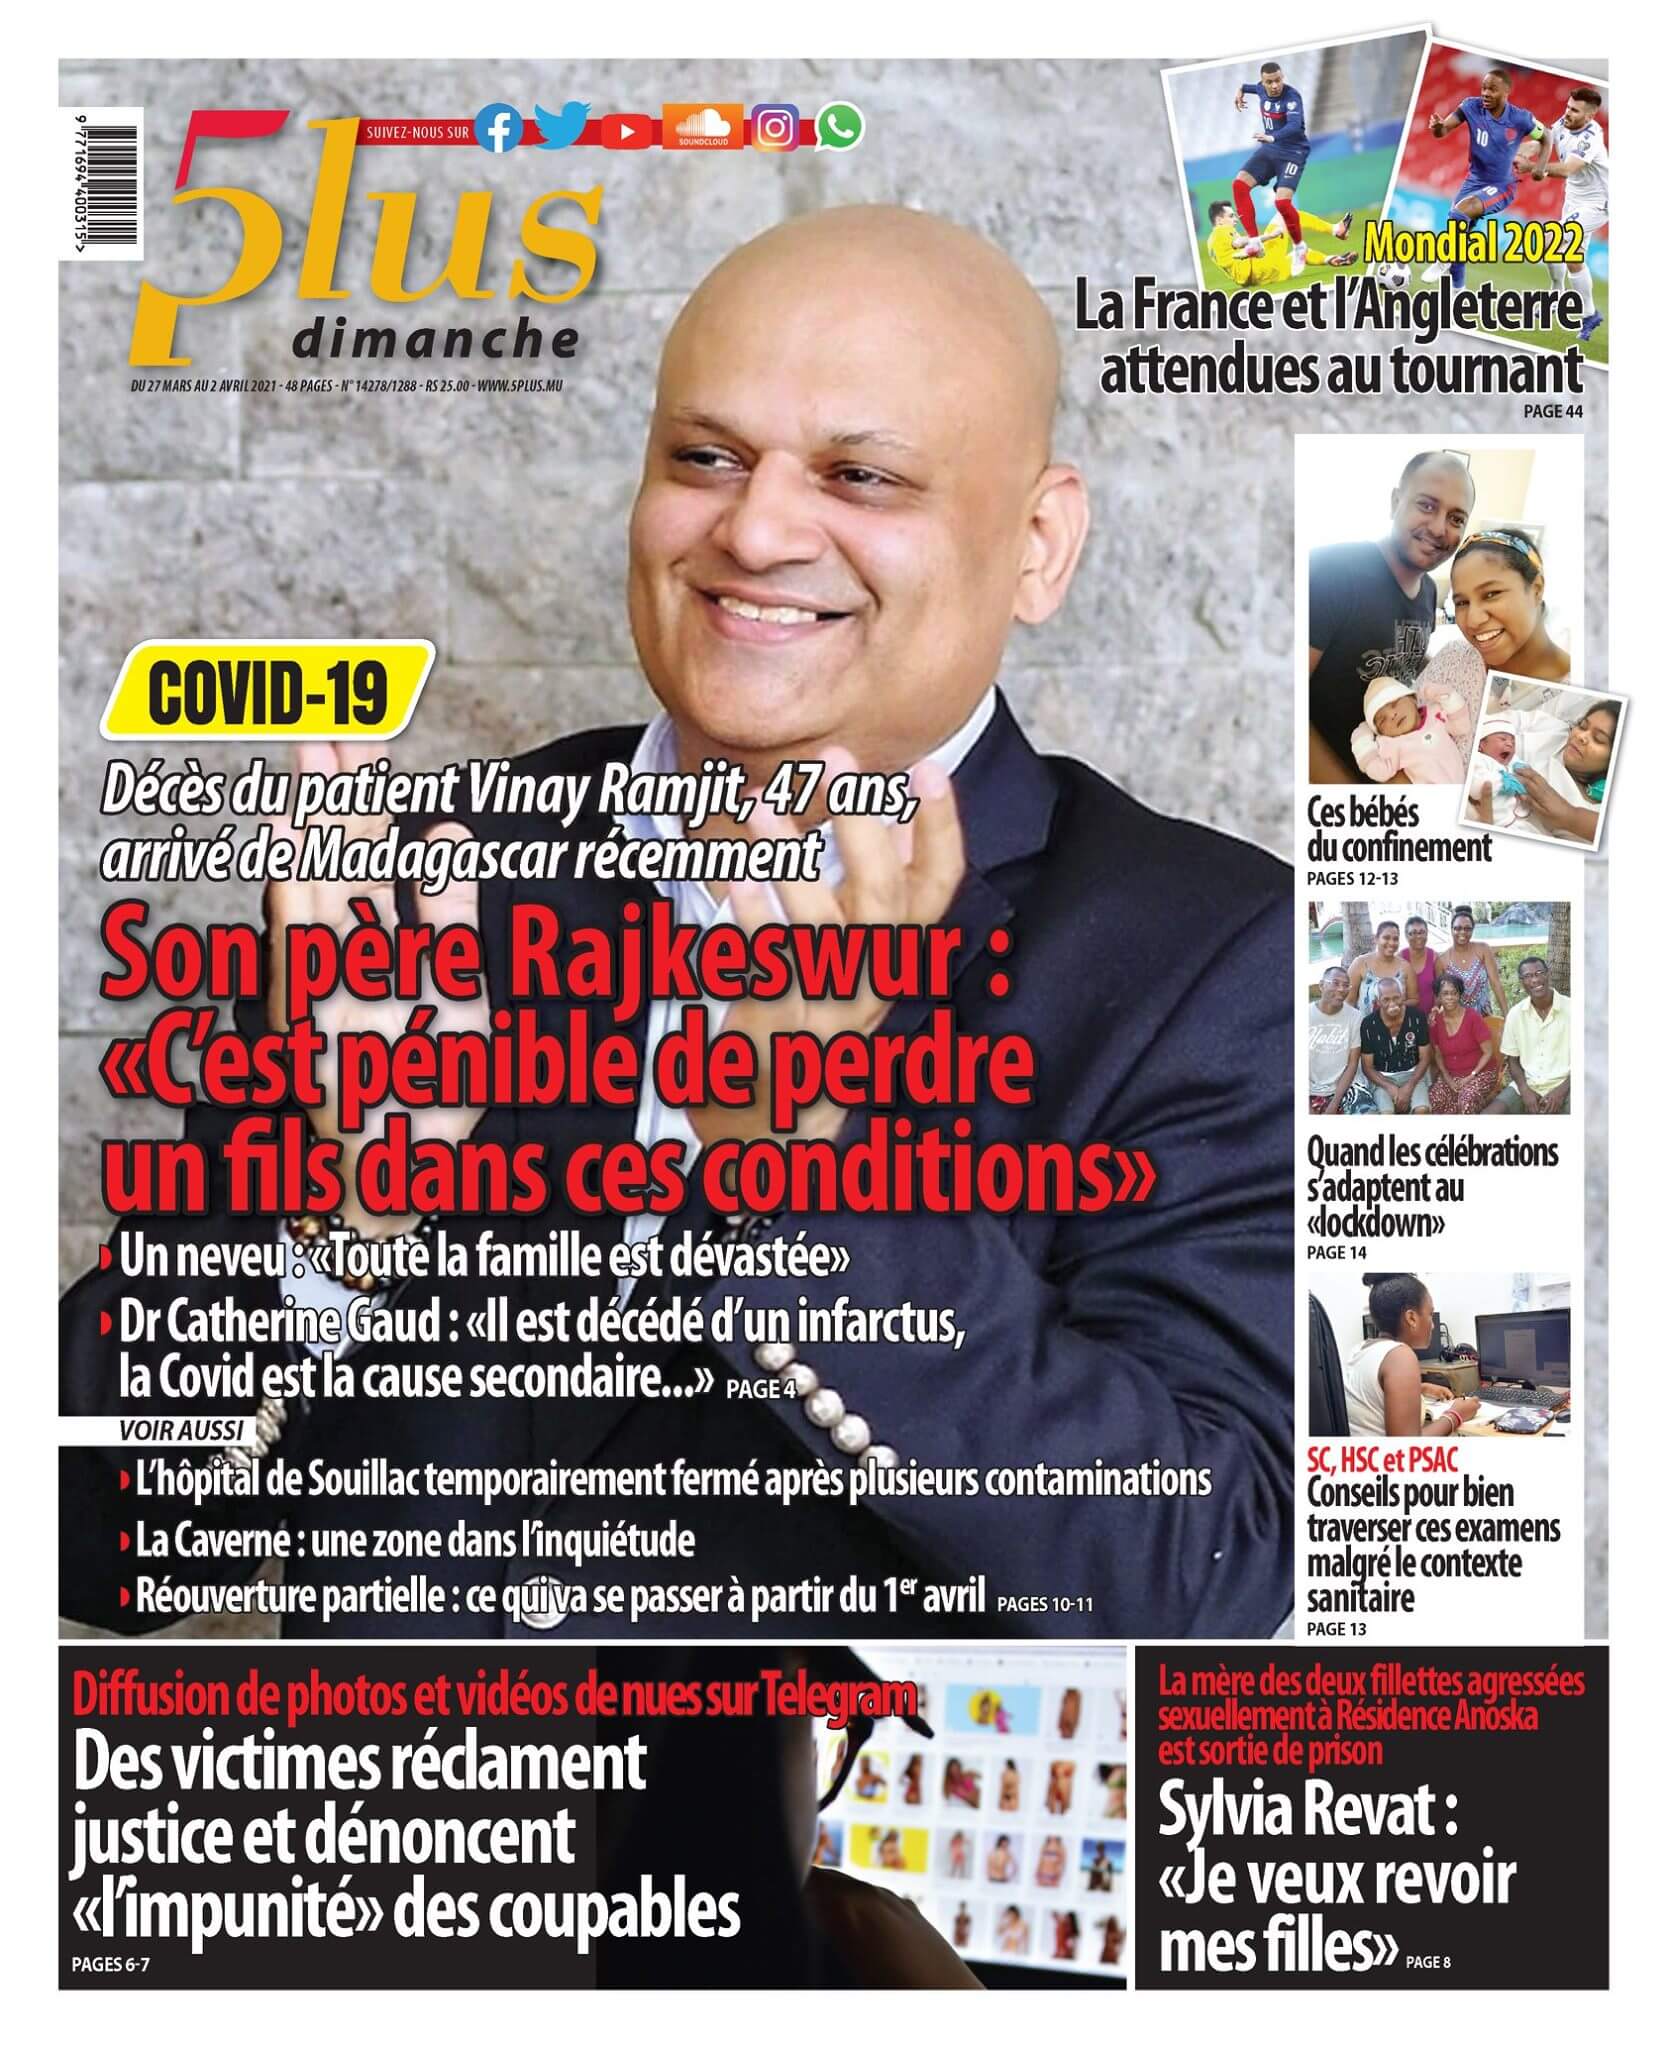 Mauritius Newspapers 13 5 Plus Dimanche